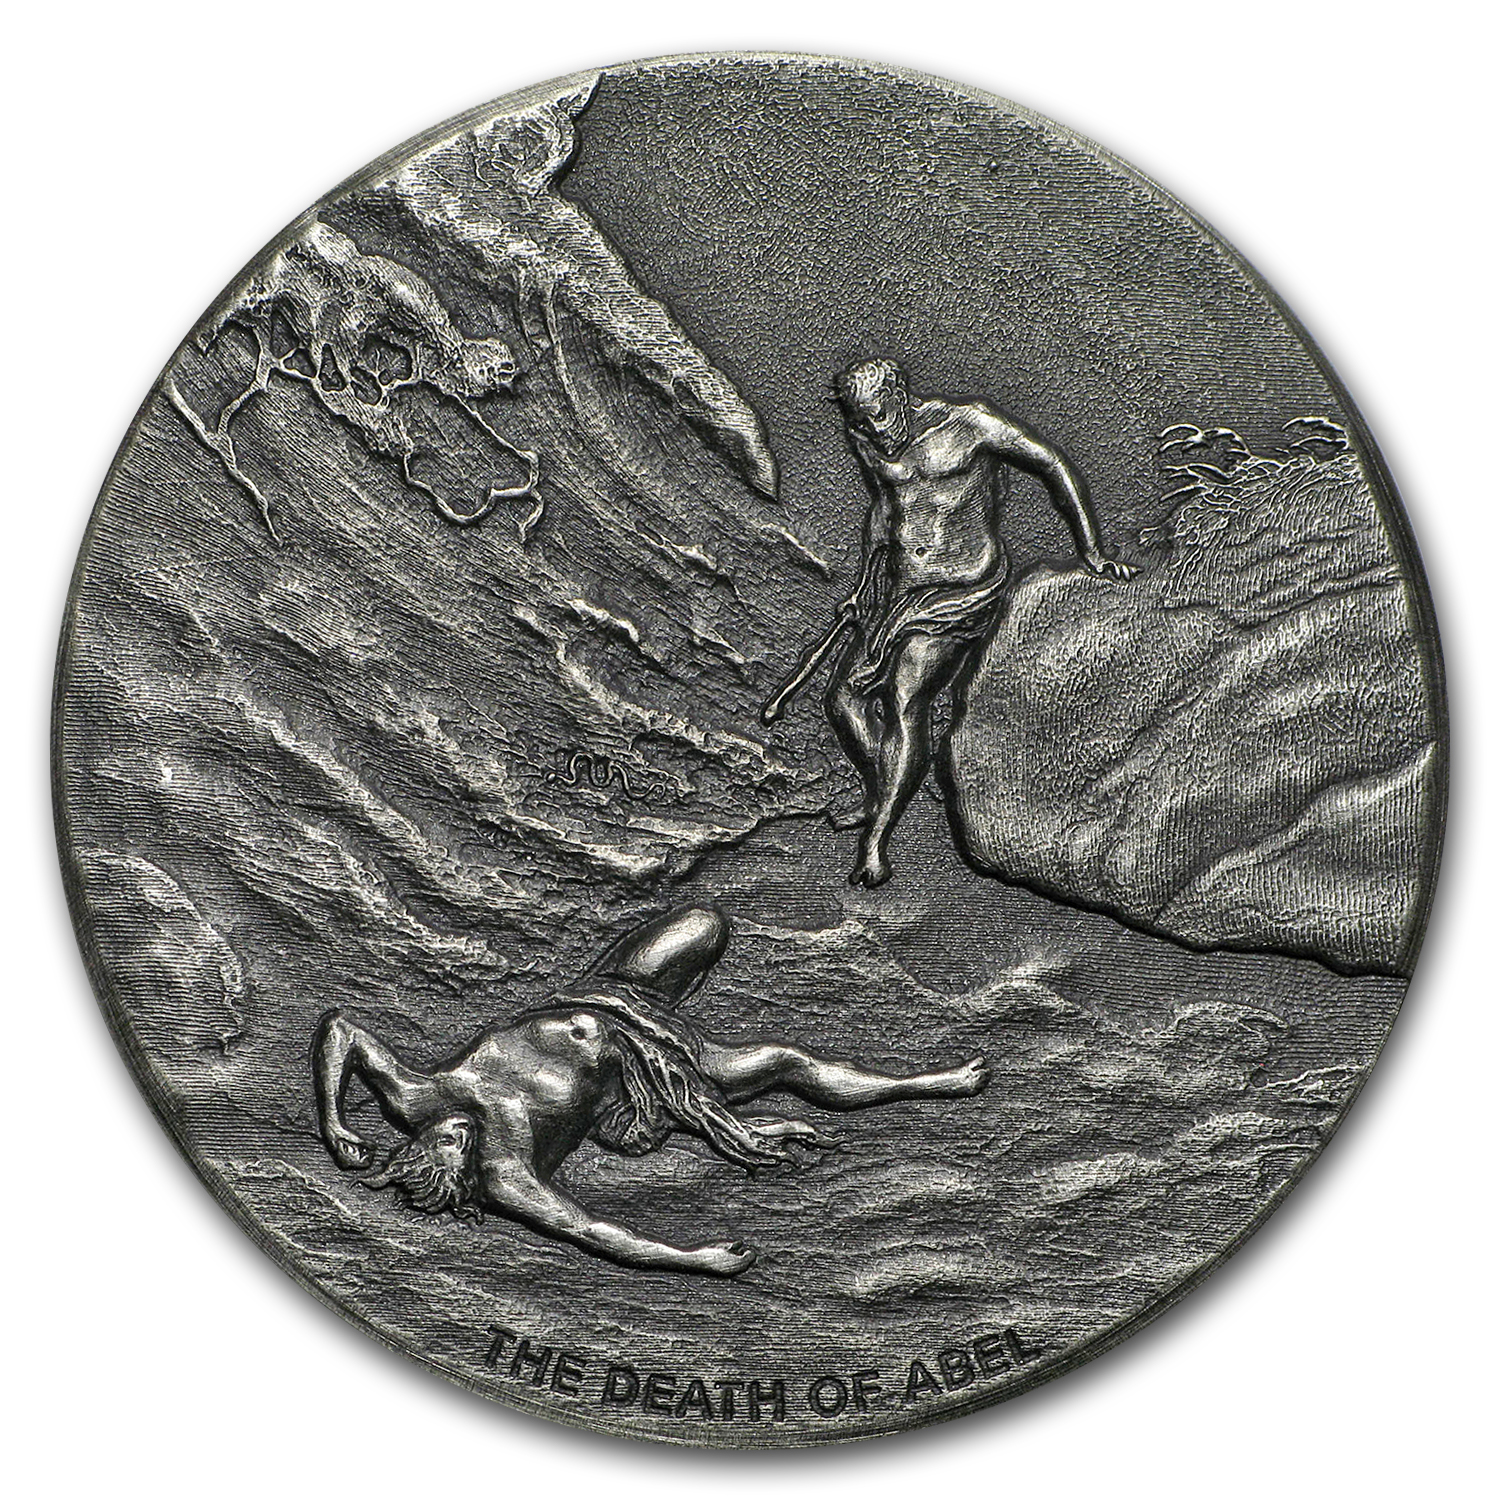 Buy 2017 2 oz Silver Coin - Biblical Series (The Death of Abel)